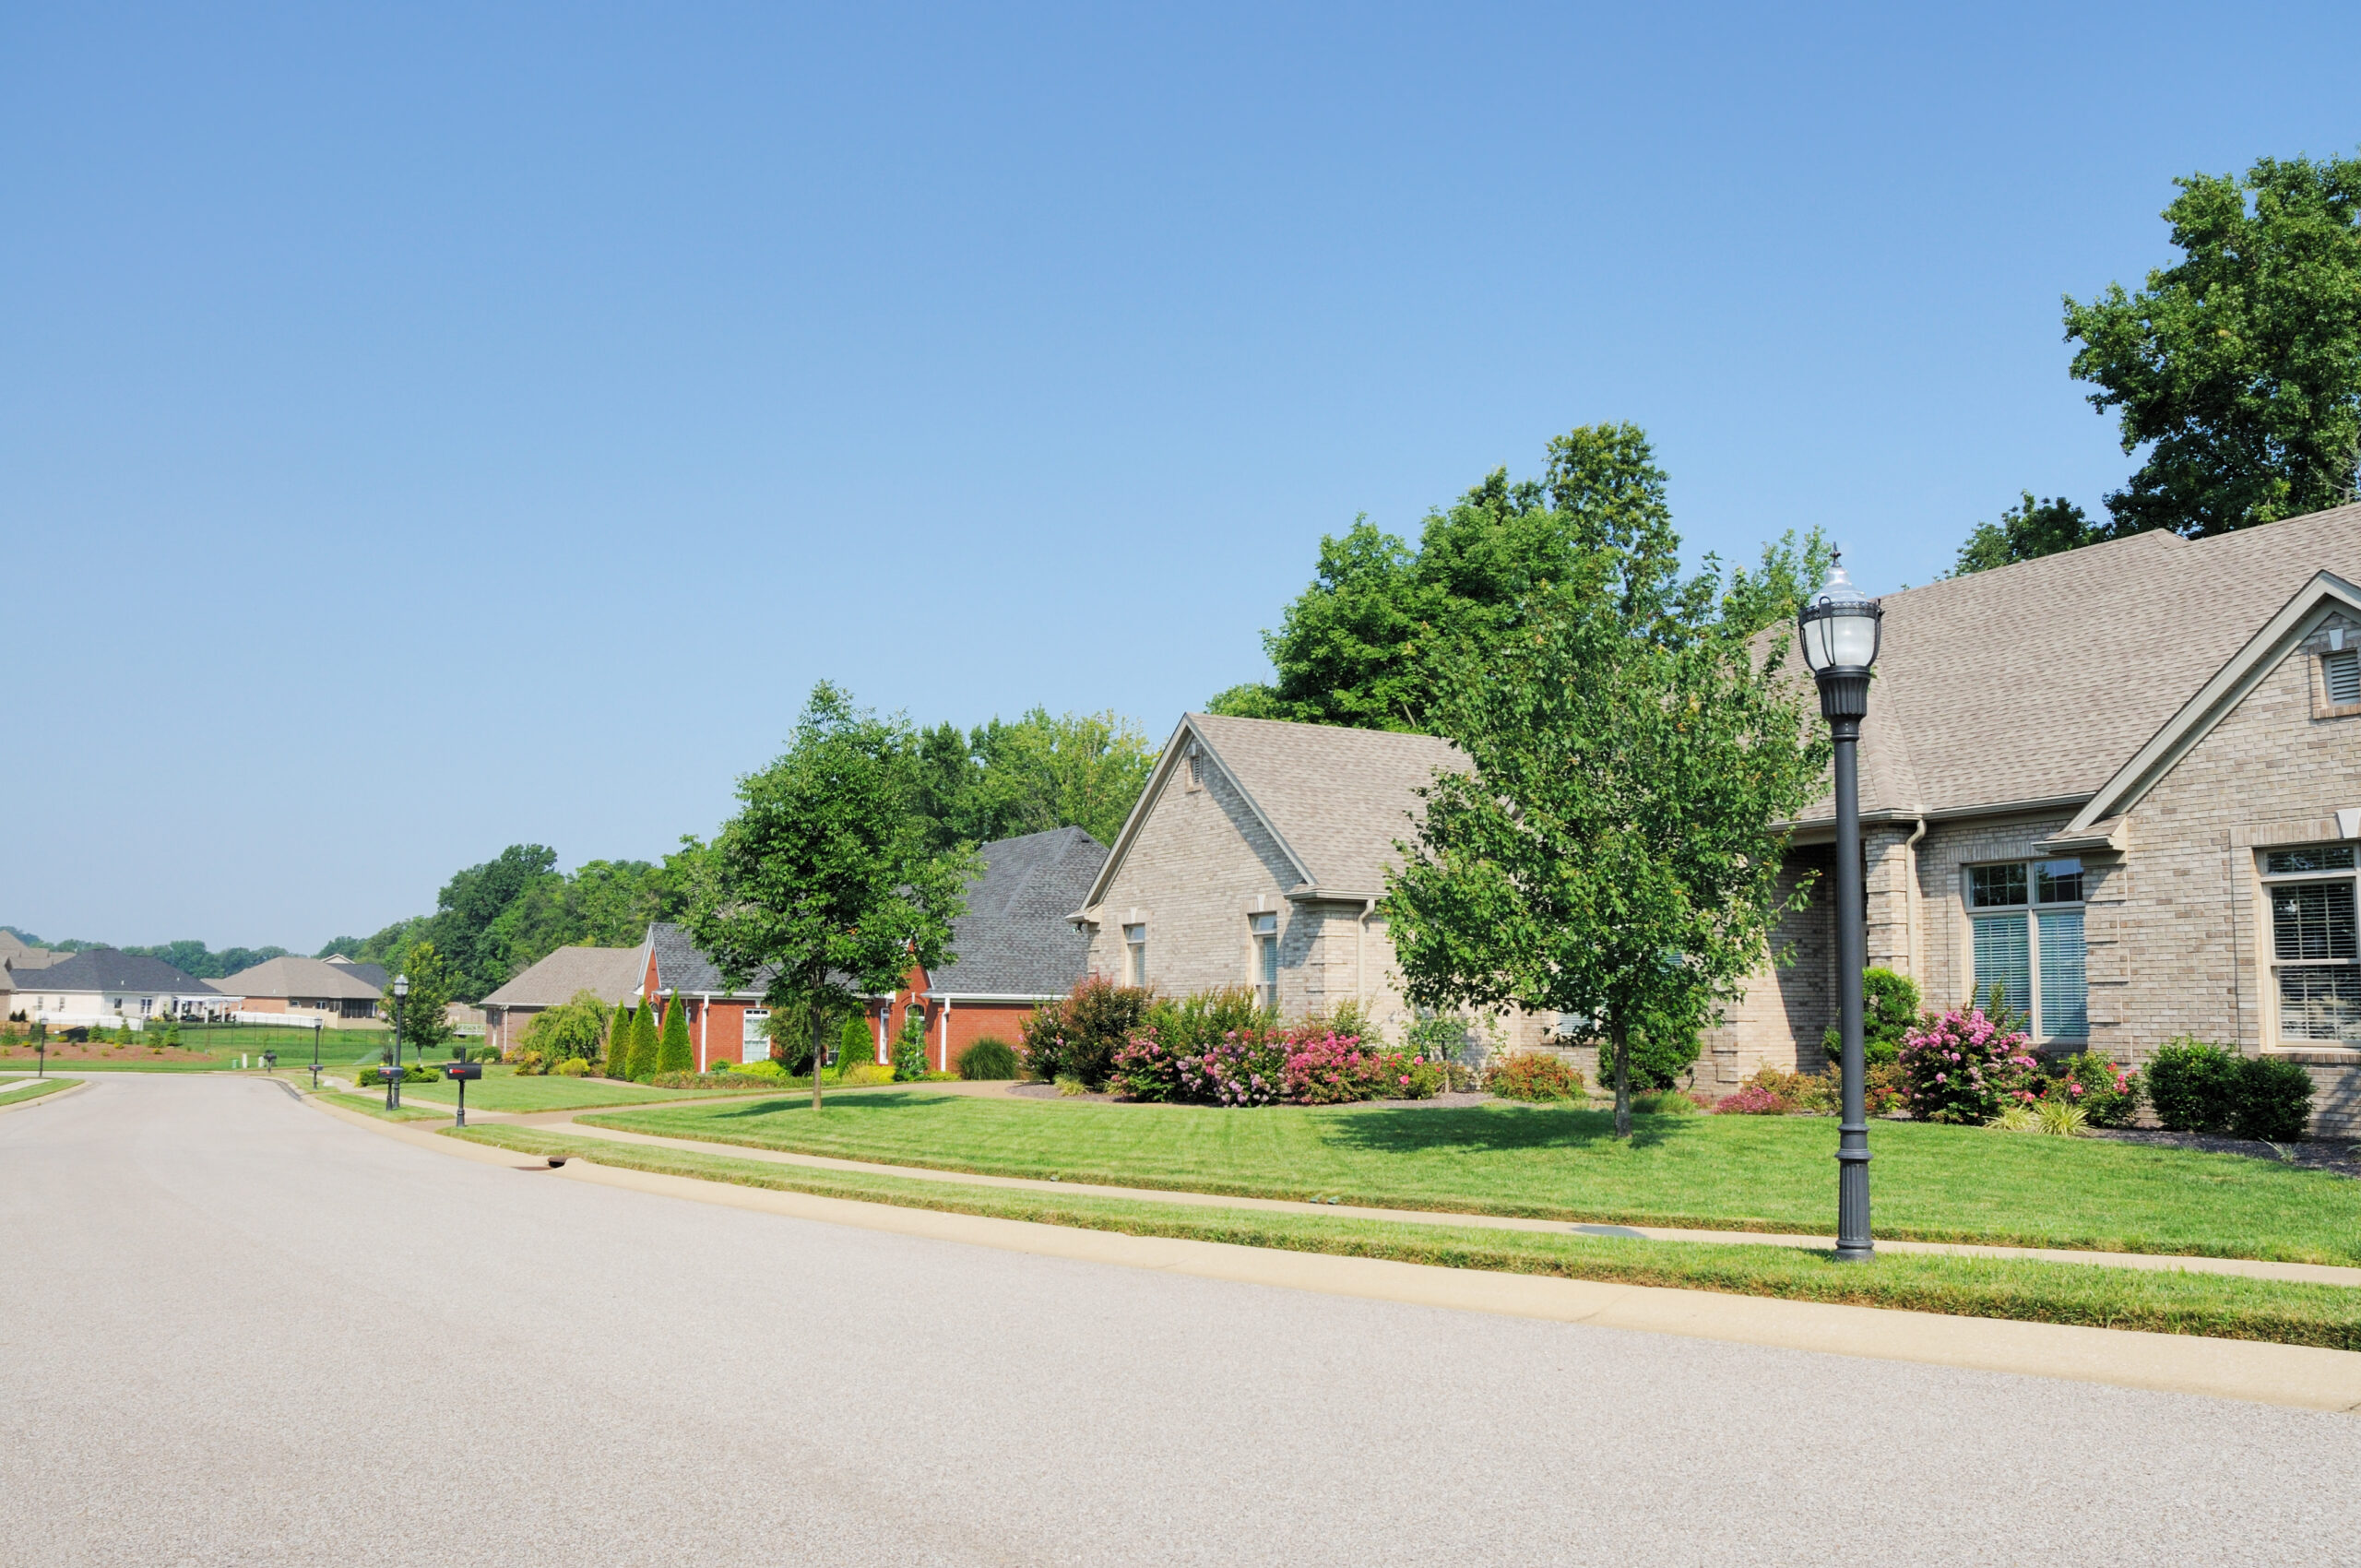 A street view of luxury homes in an upscale subdivision in Indiana.